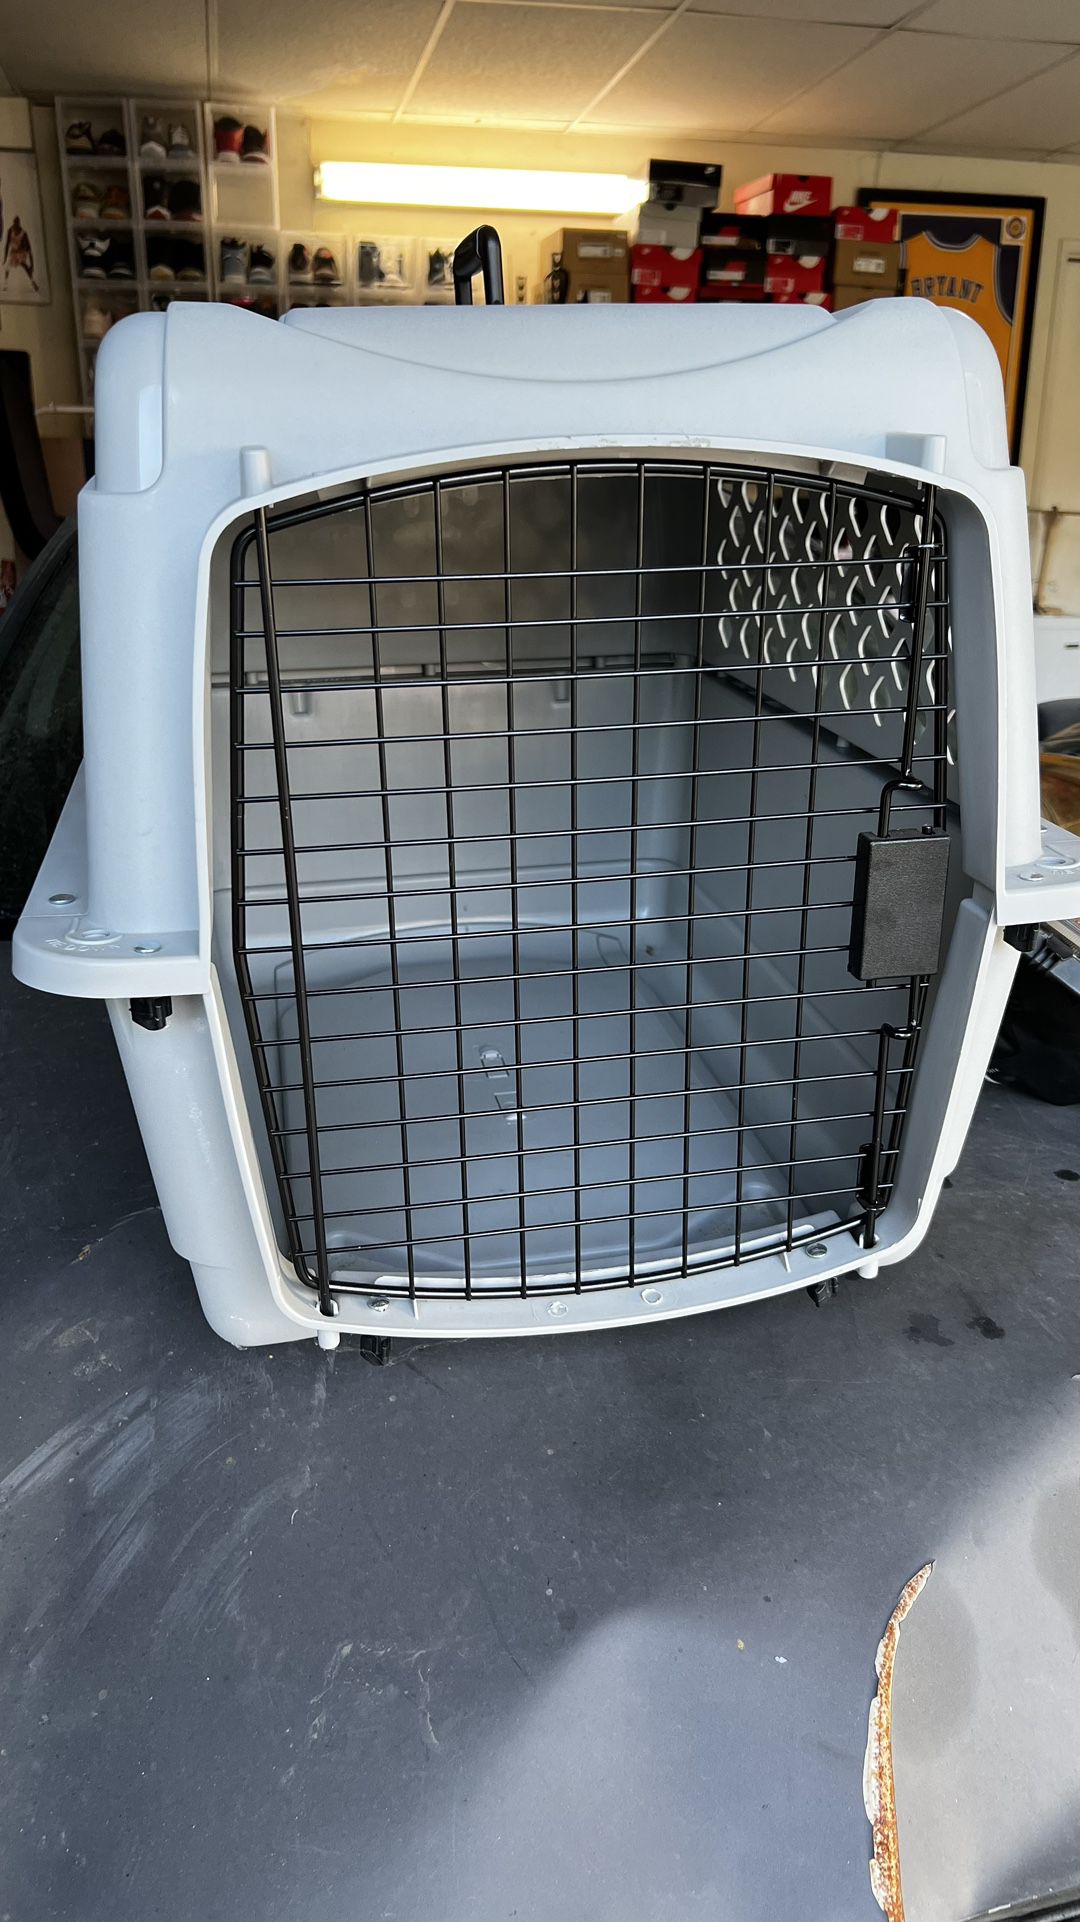 Pet Travel Kennel Crate